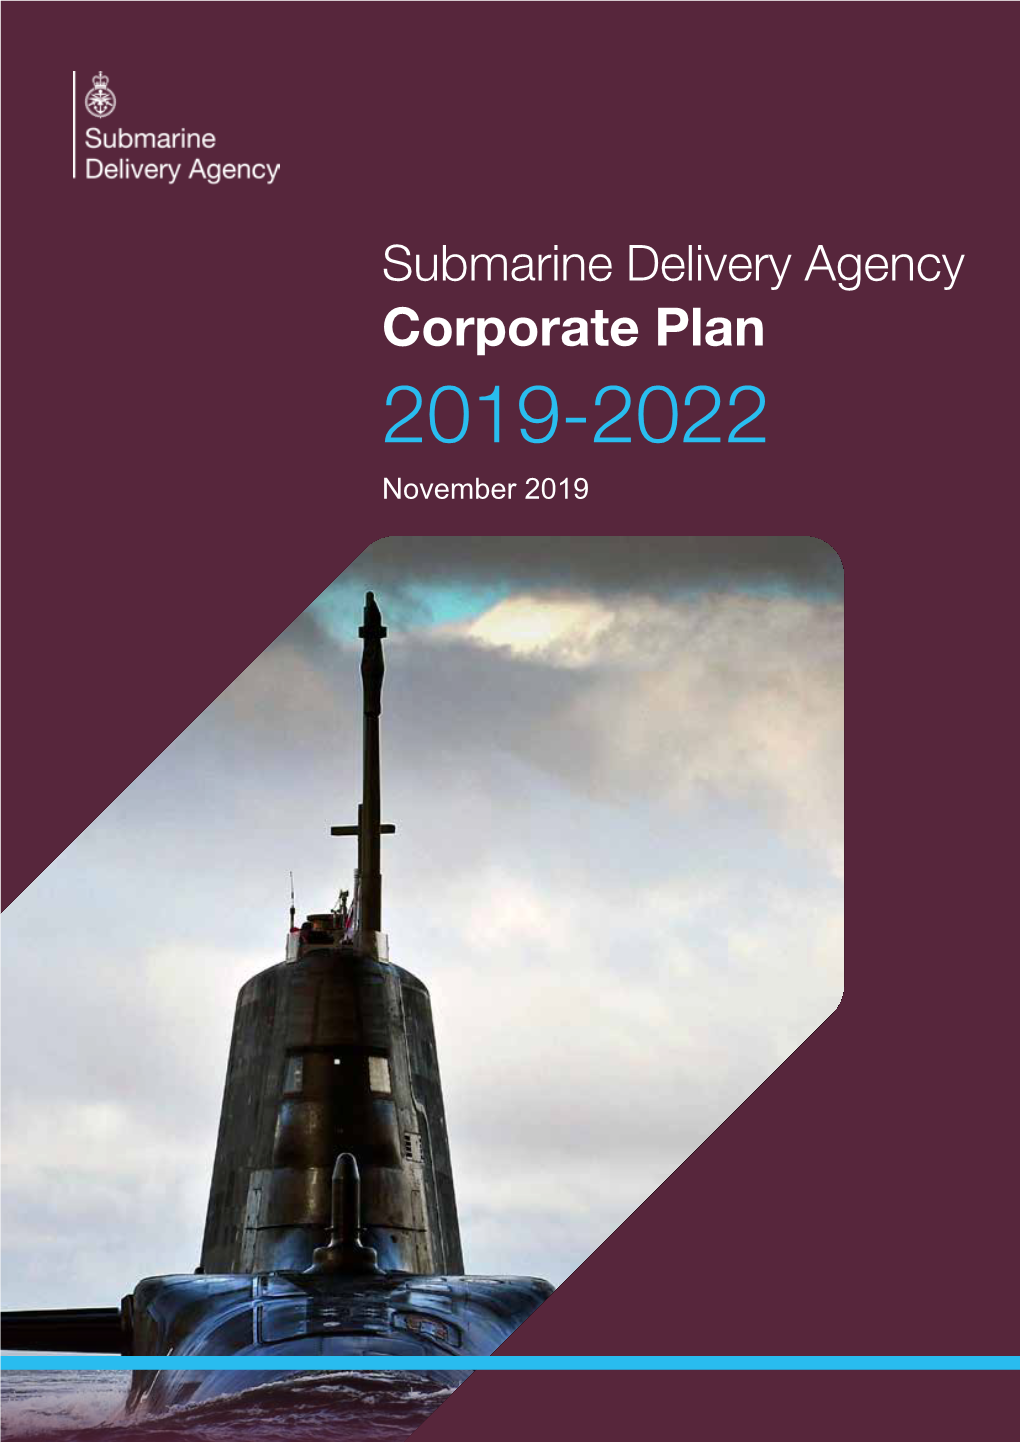 Submarine Delivery Agency Corporate Plan 2019 to 2022